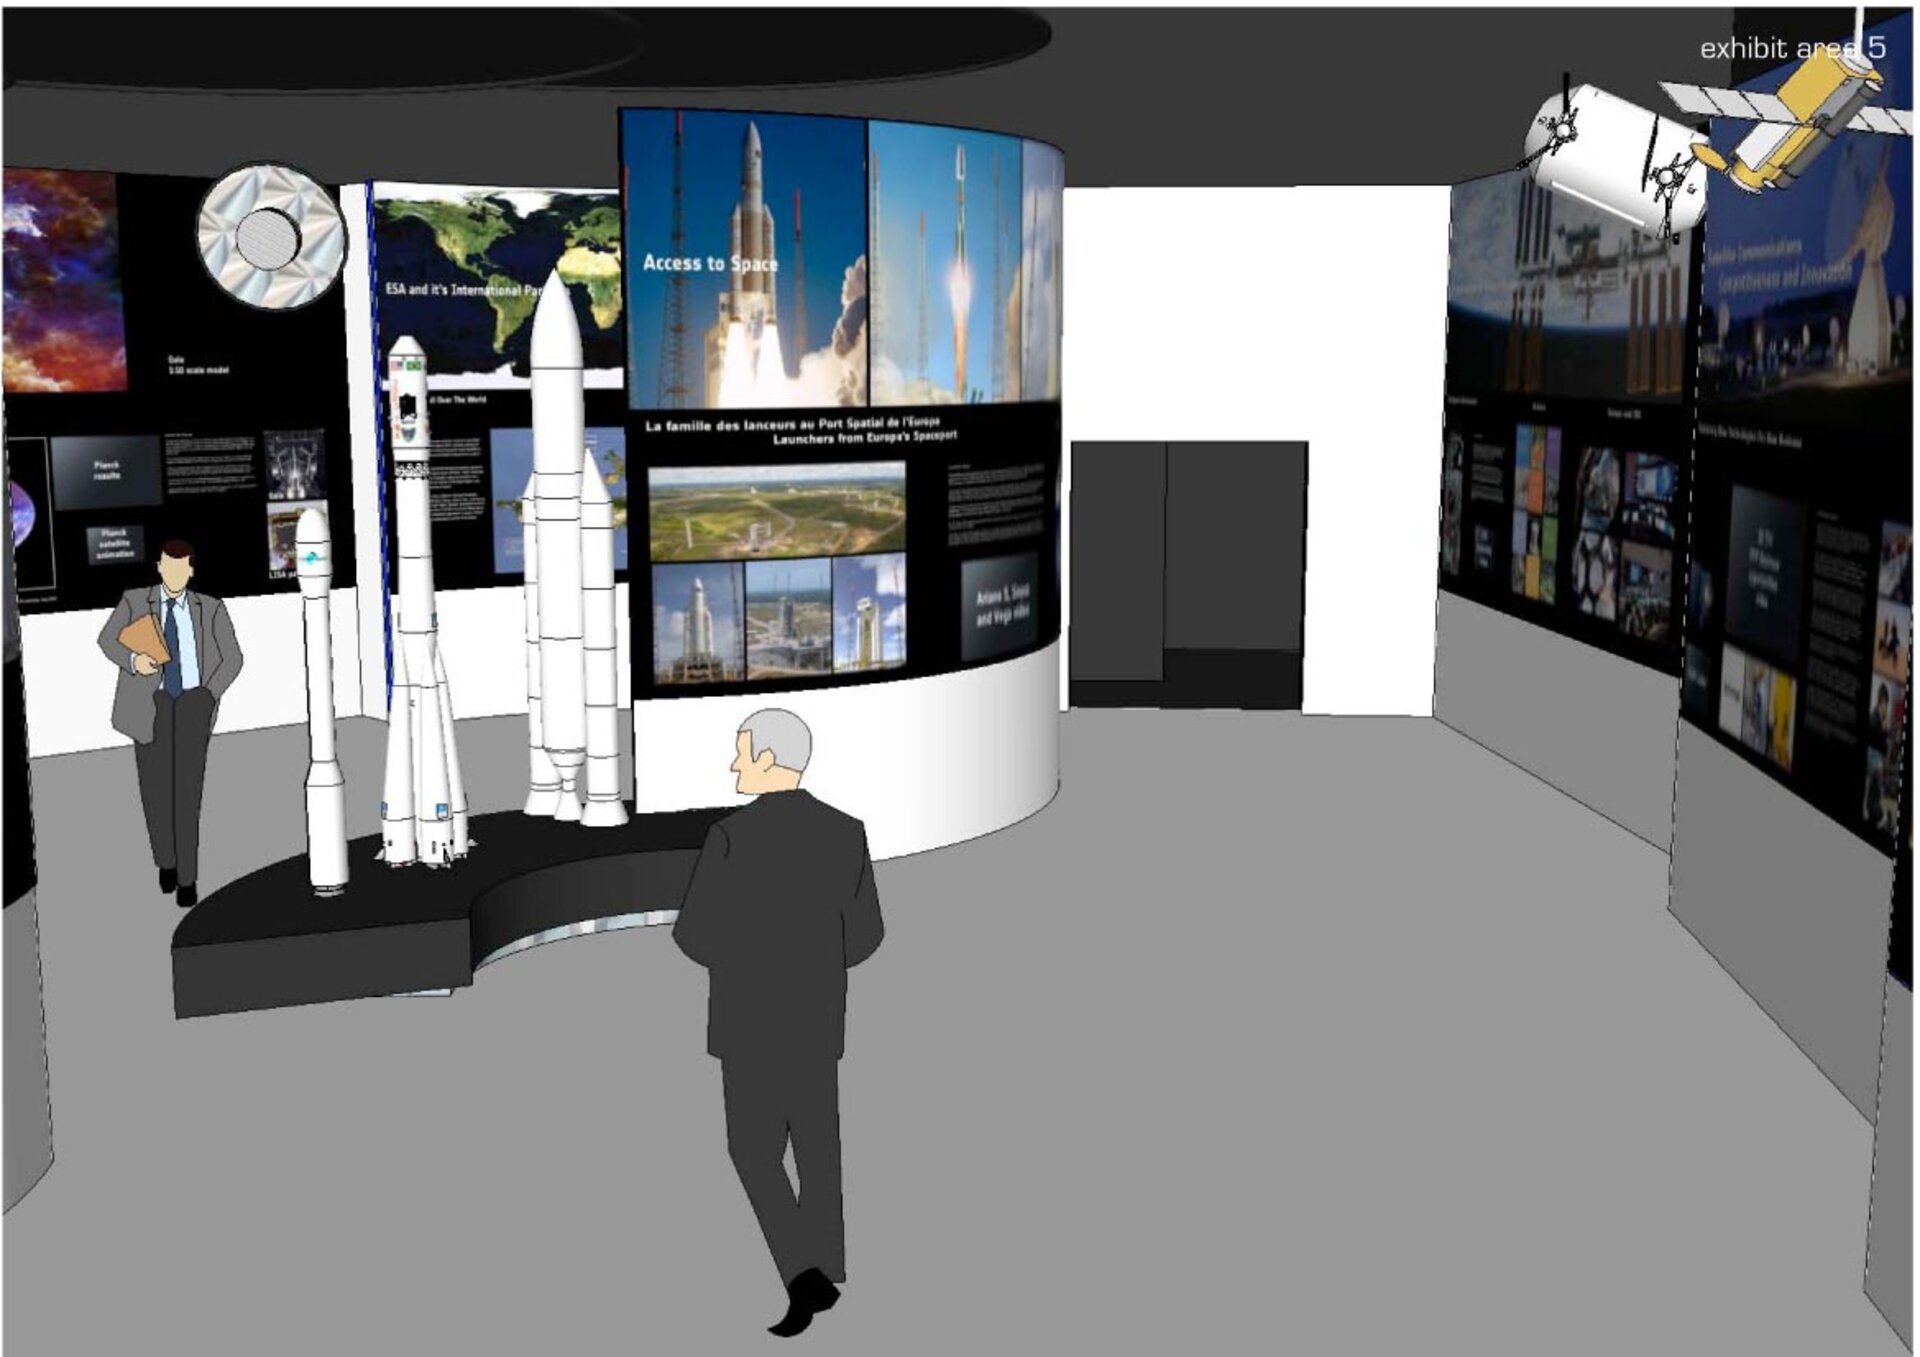 Launchers from Europe’s Spaceport